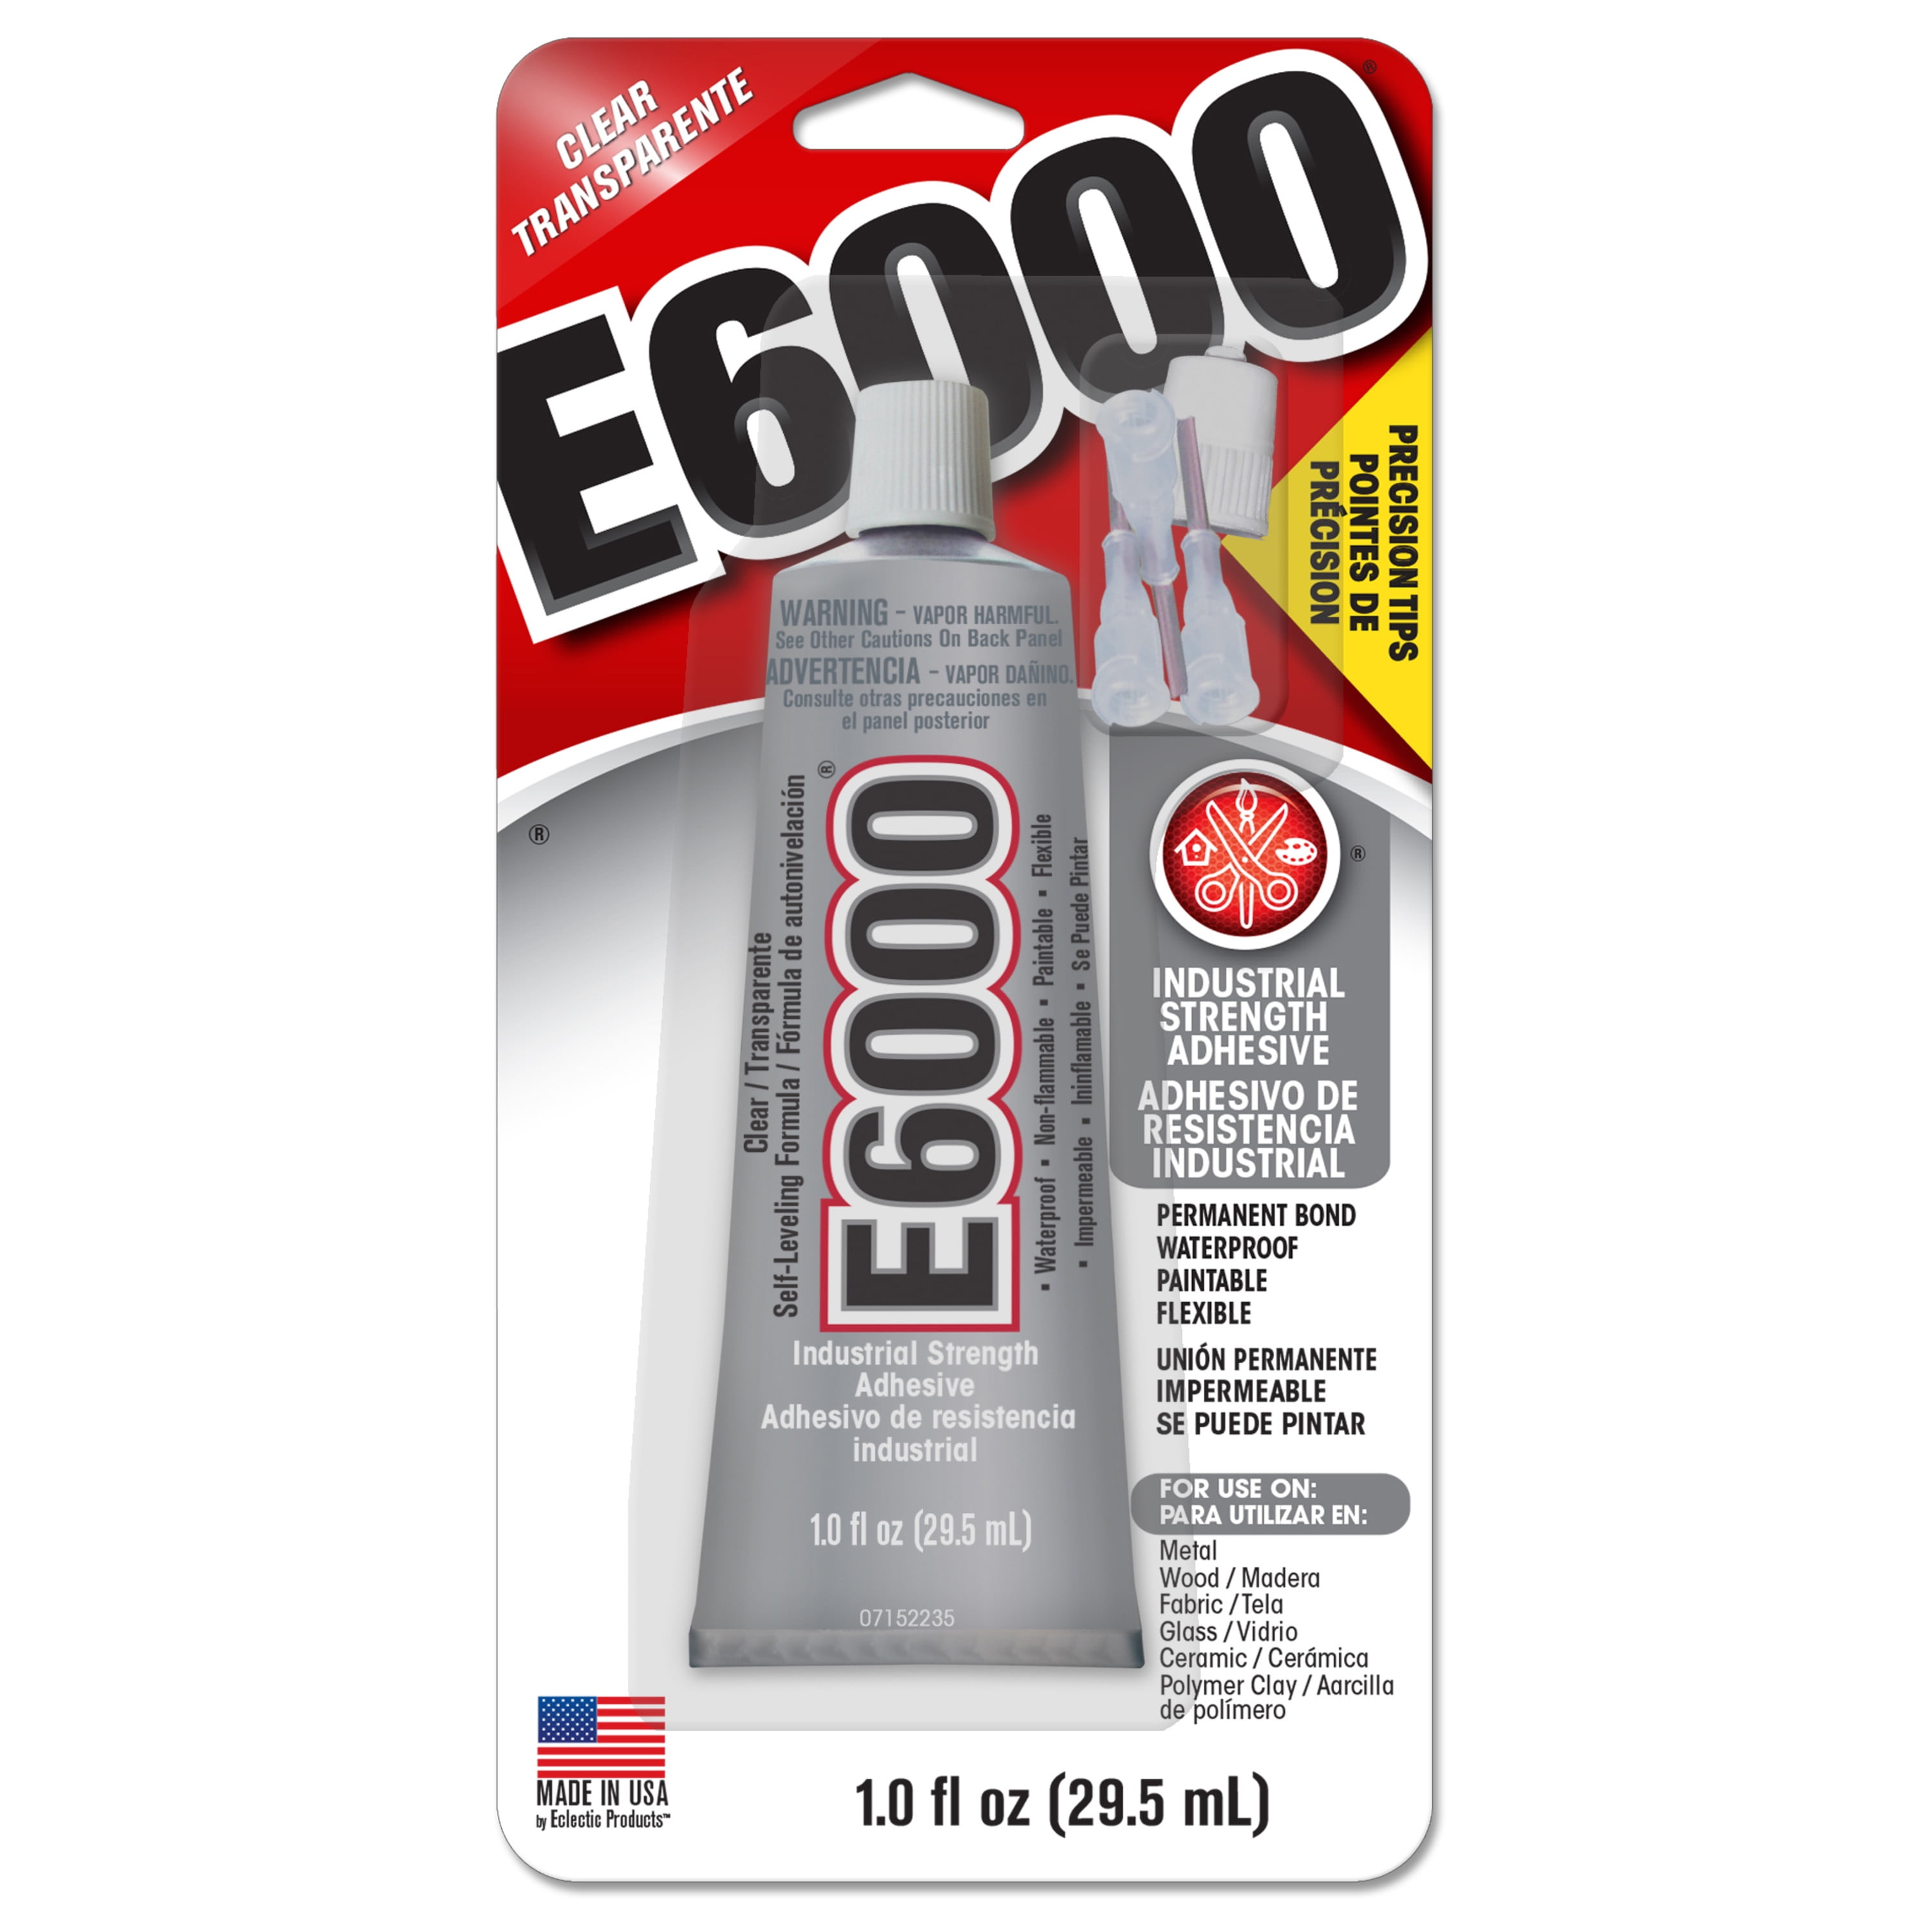 Eclectic E6000 Glue Industrial Adhesive with Precision Tip, Clear 1 oz.